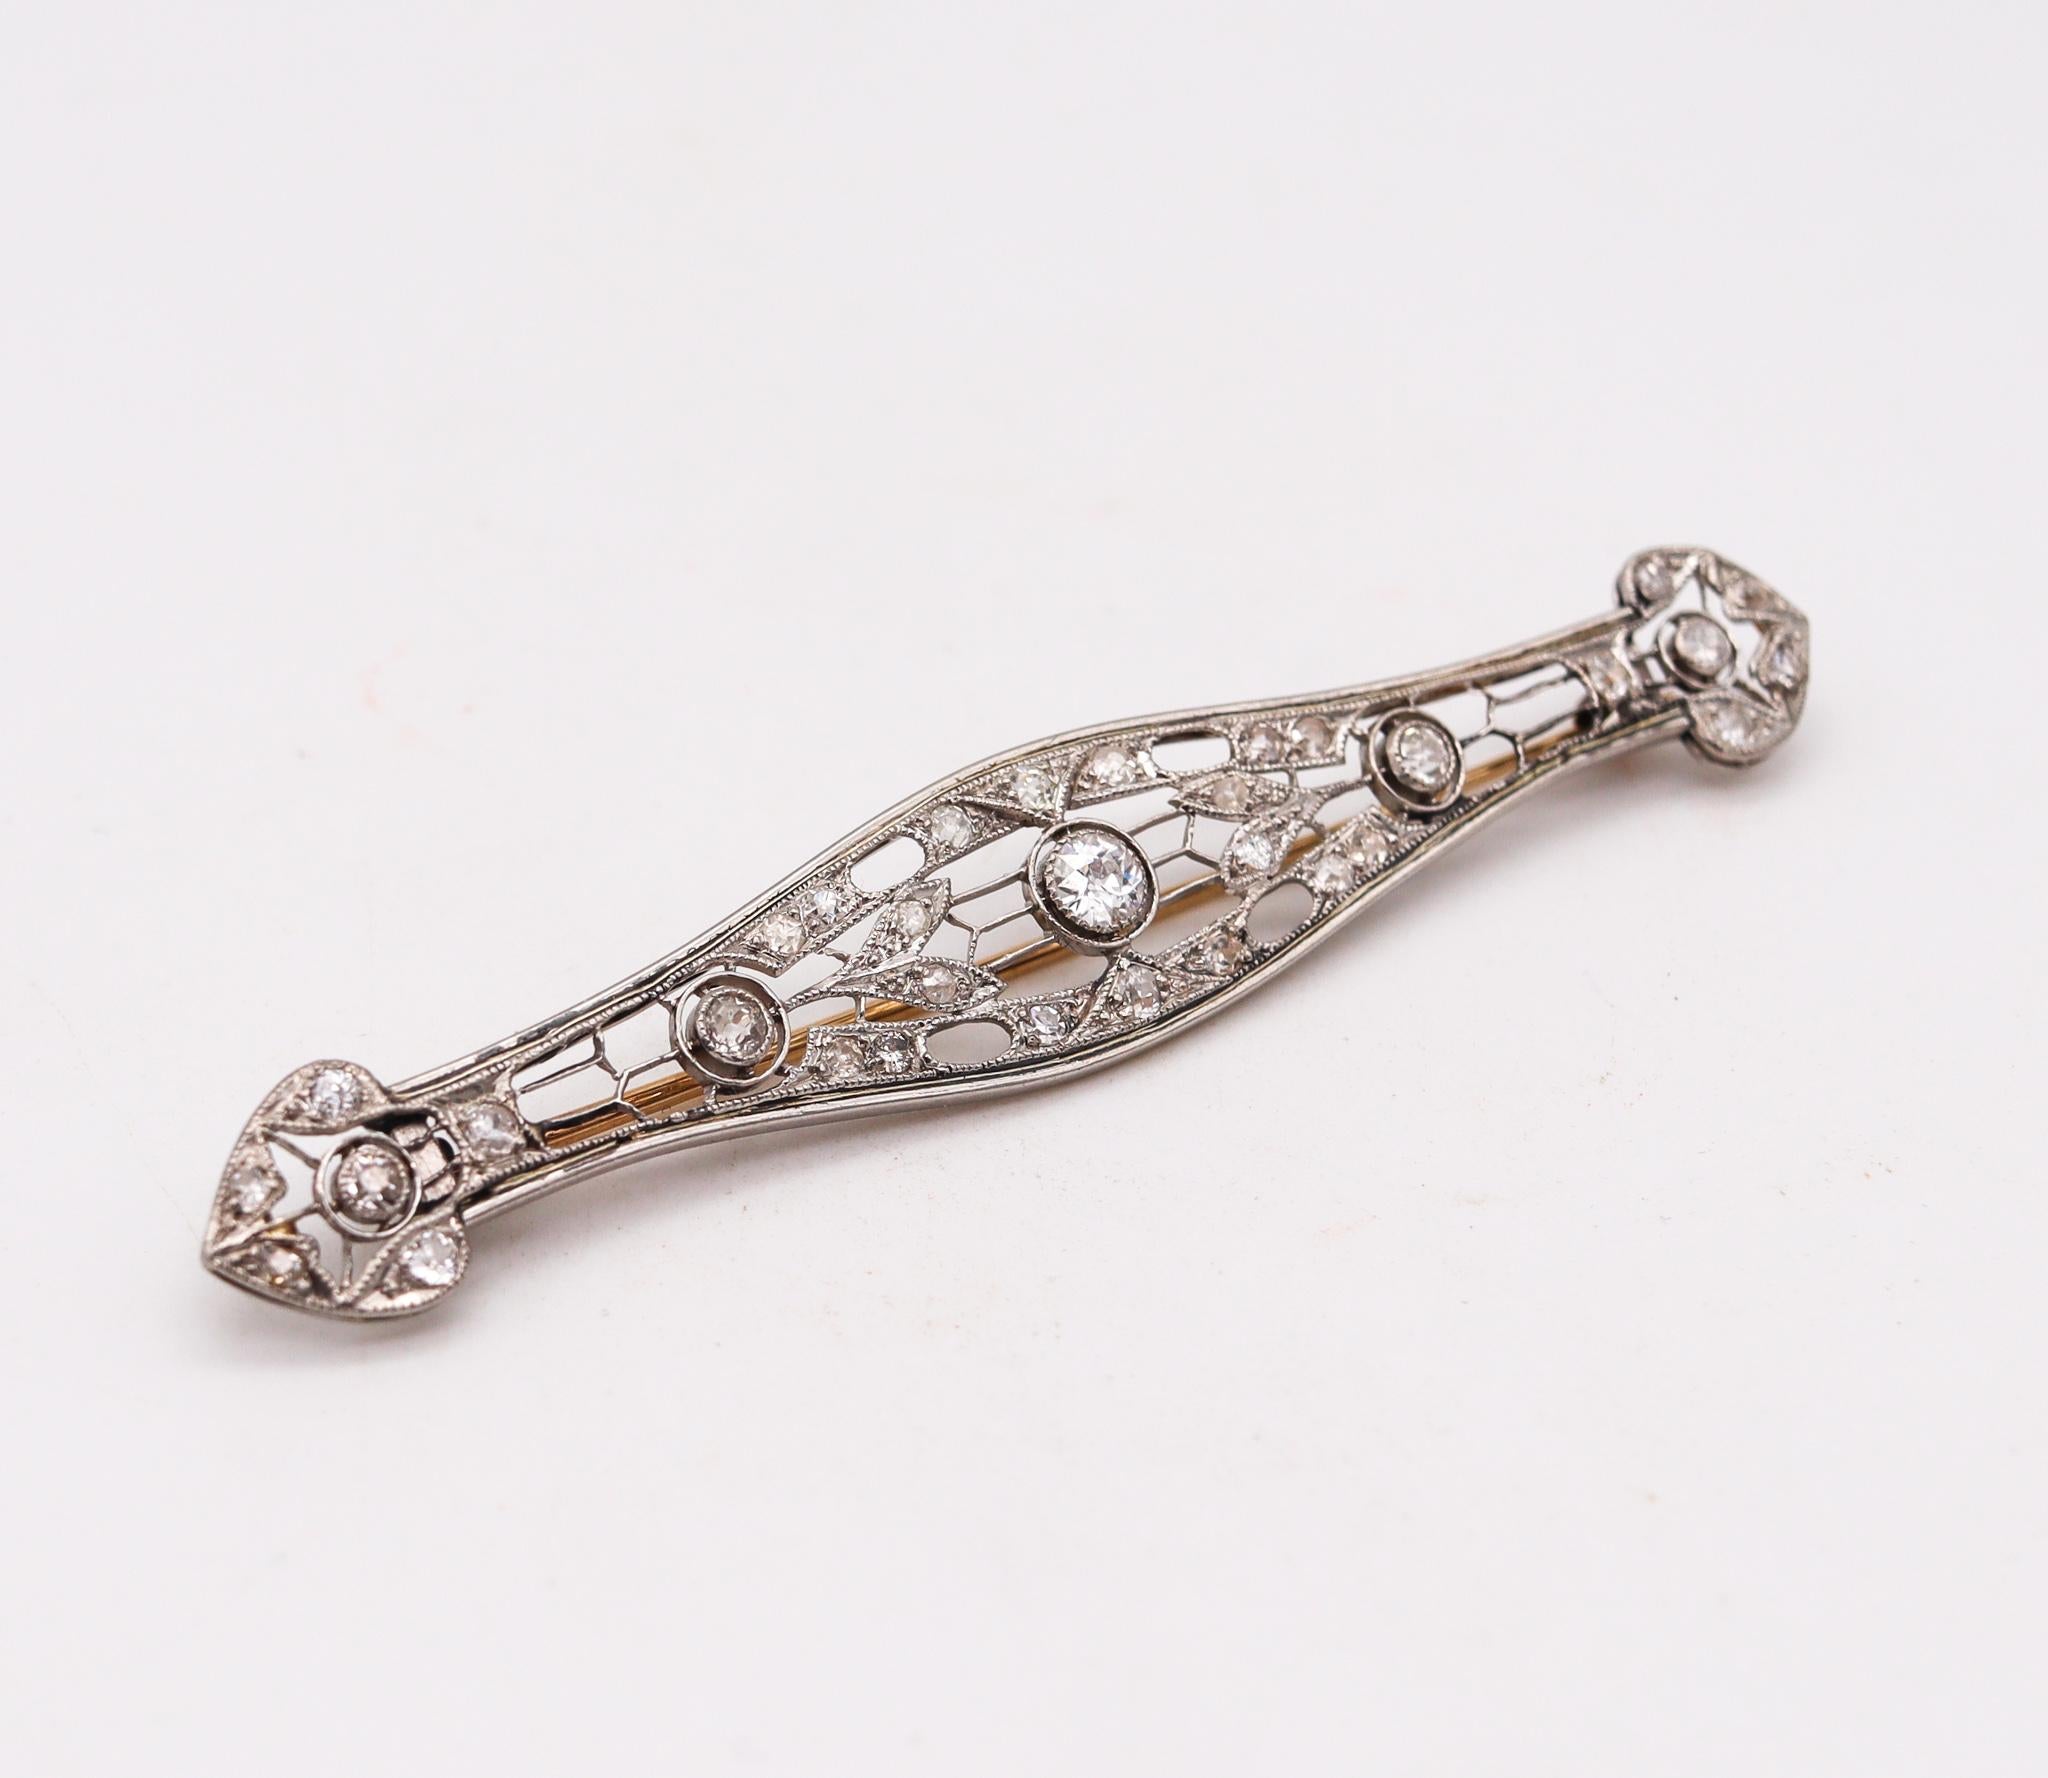 Brilliant Cut Art Deco 1930 Elongated Classic Brooch In Platinum With 2.38 Ctw In Diamonds For Sale